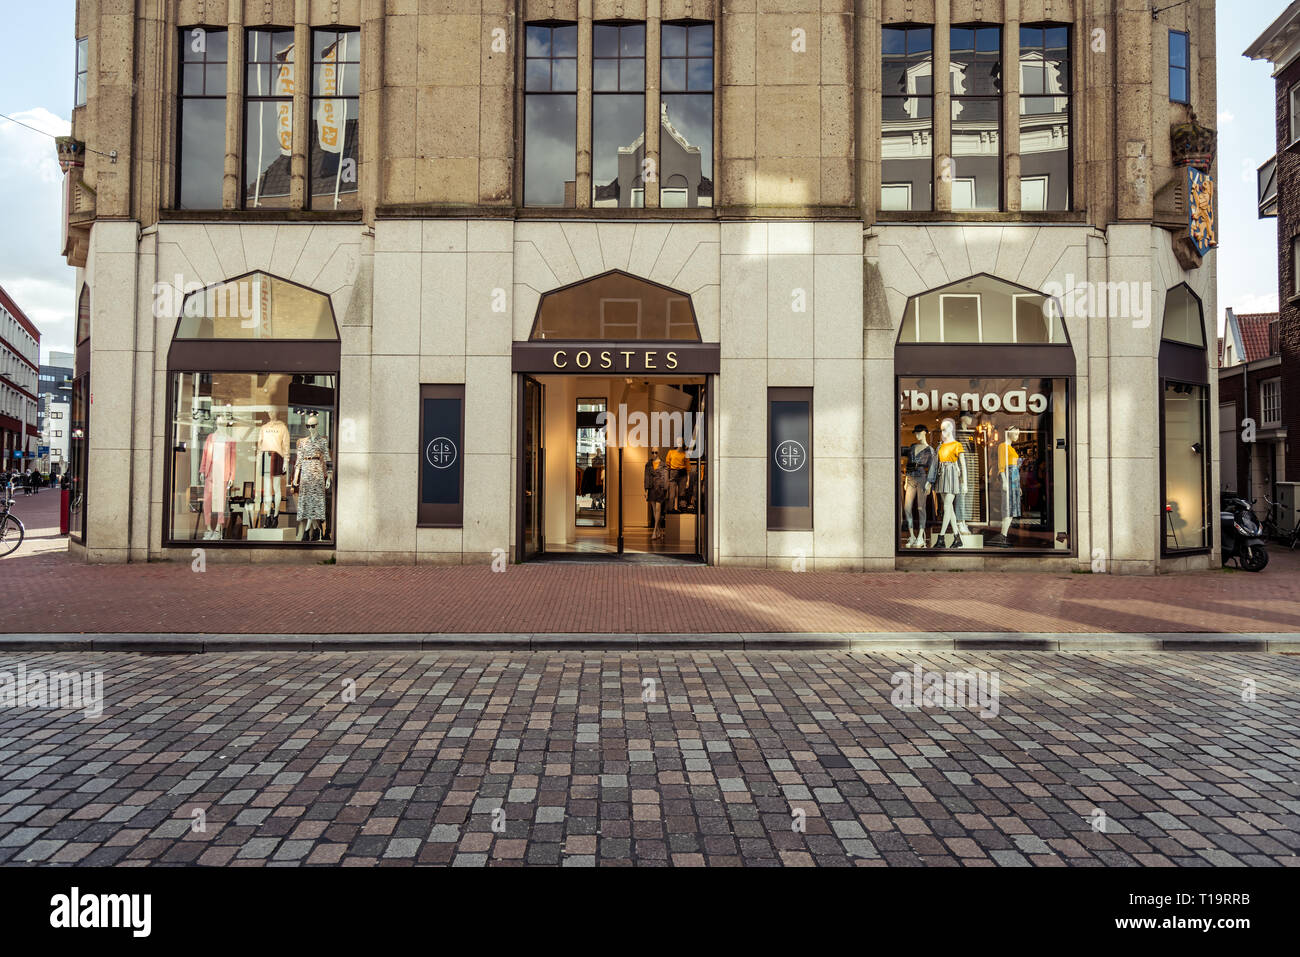 Dordrecht, Netherlands - March 03, 2019: Costes logo on a storefront.  Costes, part of The Sting Companies, is originally a Dutch chain of  clothing sto Stock Photo - Alamy